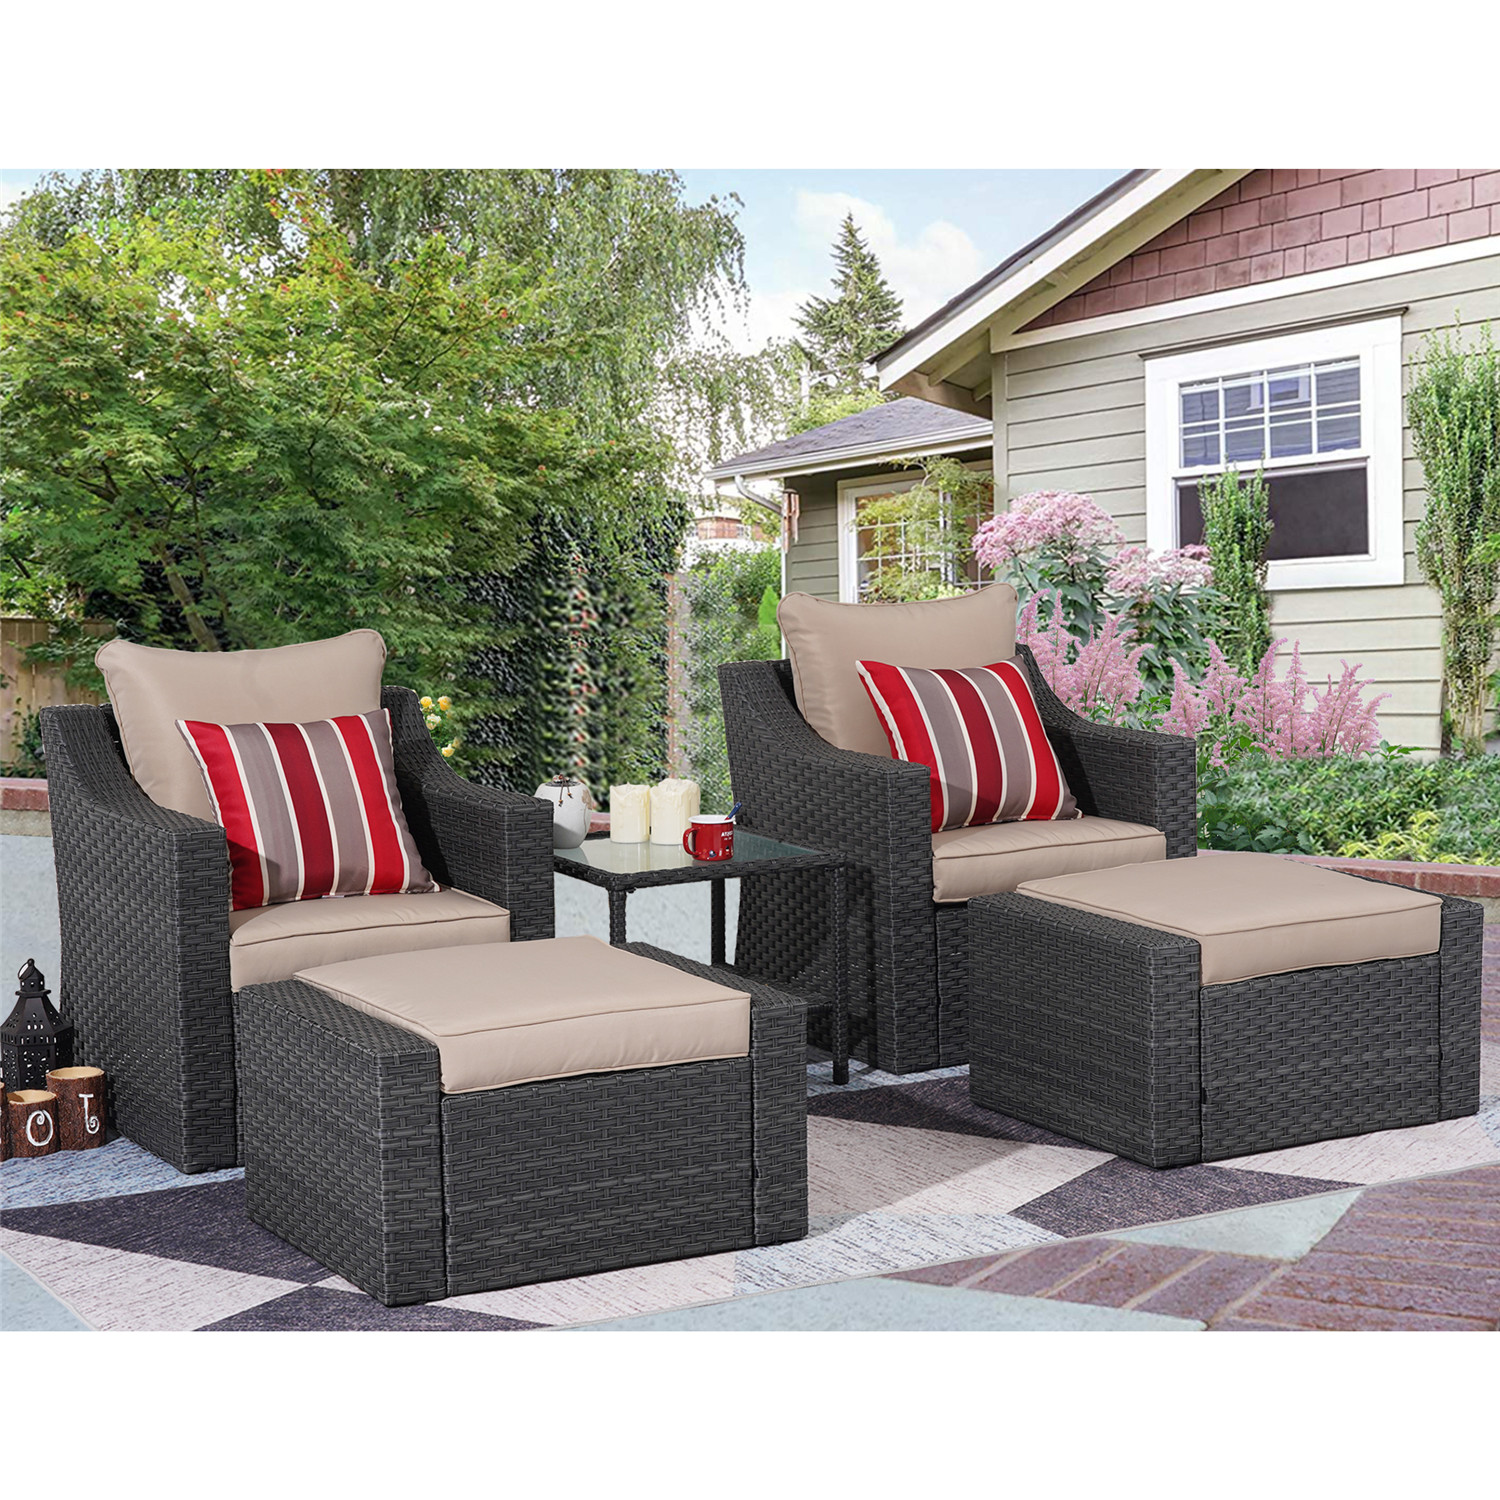 5 Pcs Outdoor Patio Furniture Set All Weather PE Rattan Wicker Cushioned Sectional Sofa Chairs with Ottomans and Side Table, Khaki - image 2 of 7